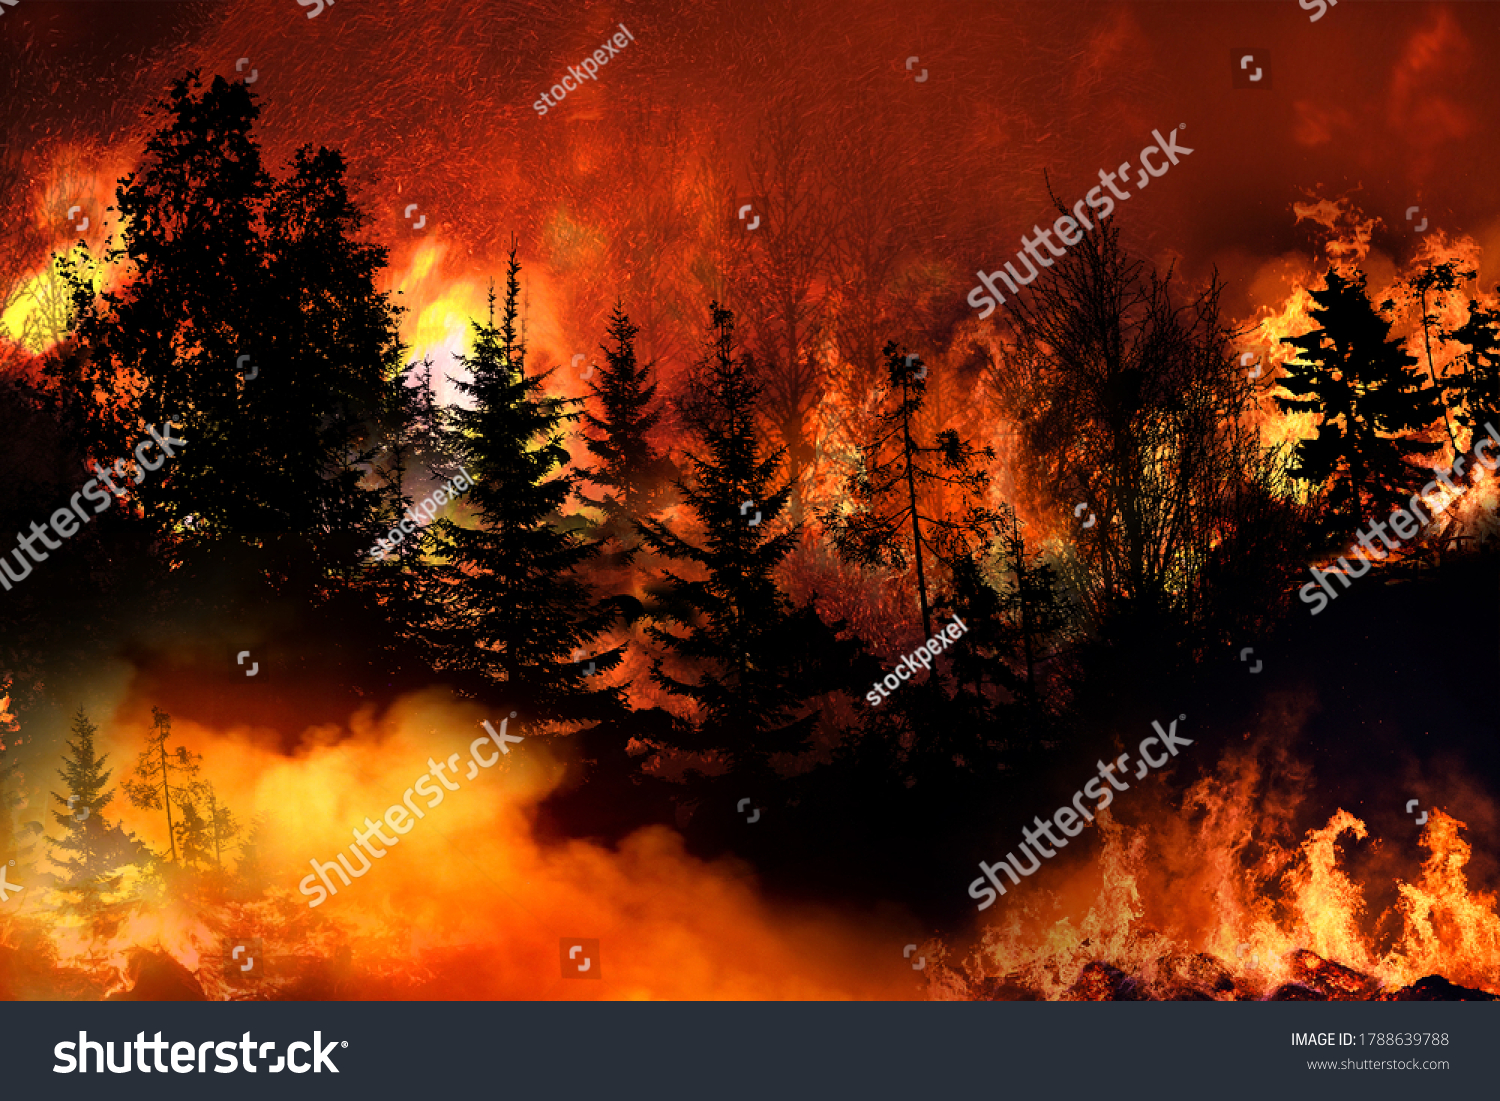 Spain wildfire, Heatwave  causes forest burning rapidly and destroyed, silhouette, natural calamity,  #1788639788